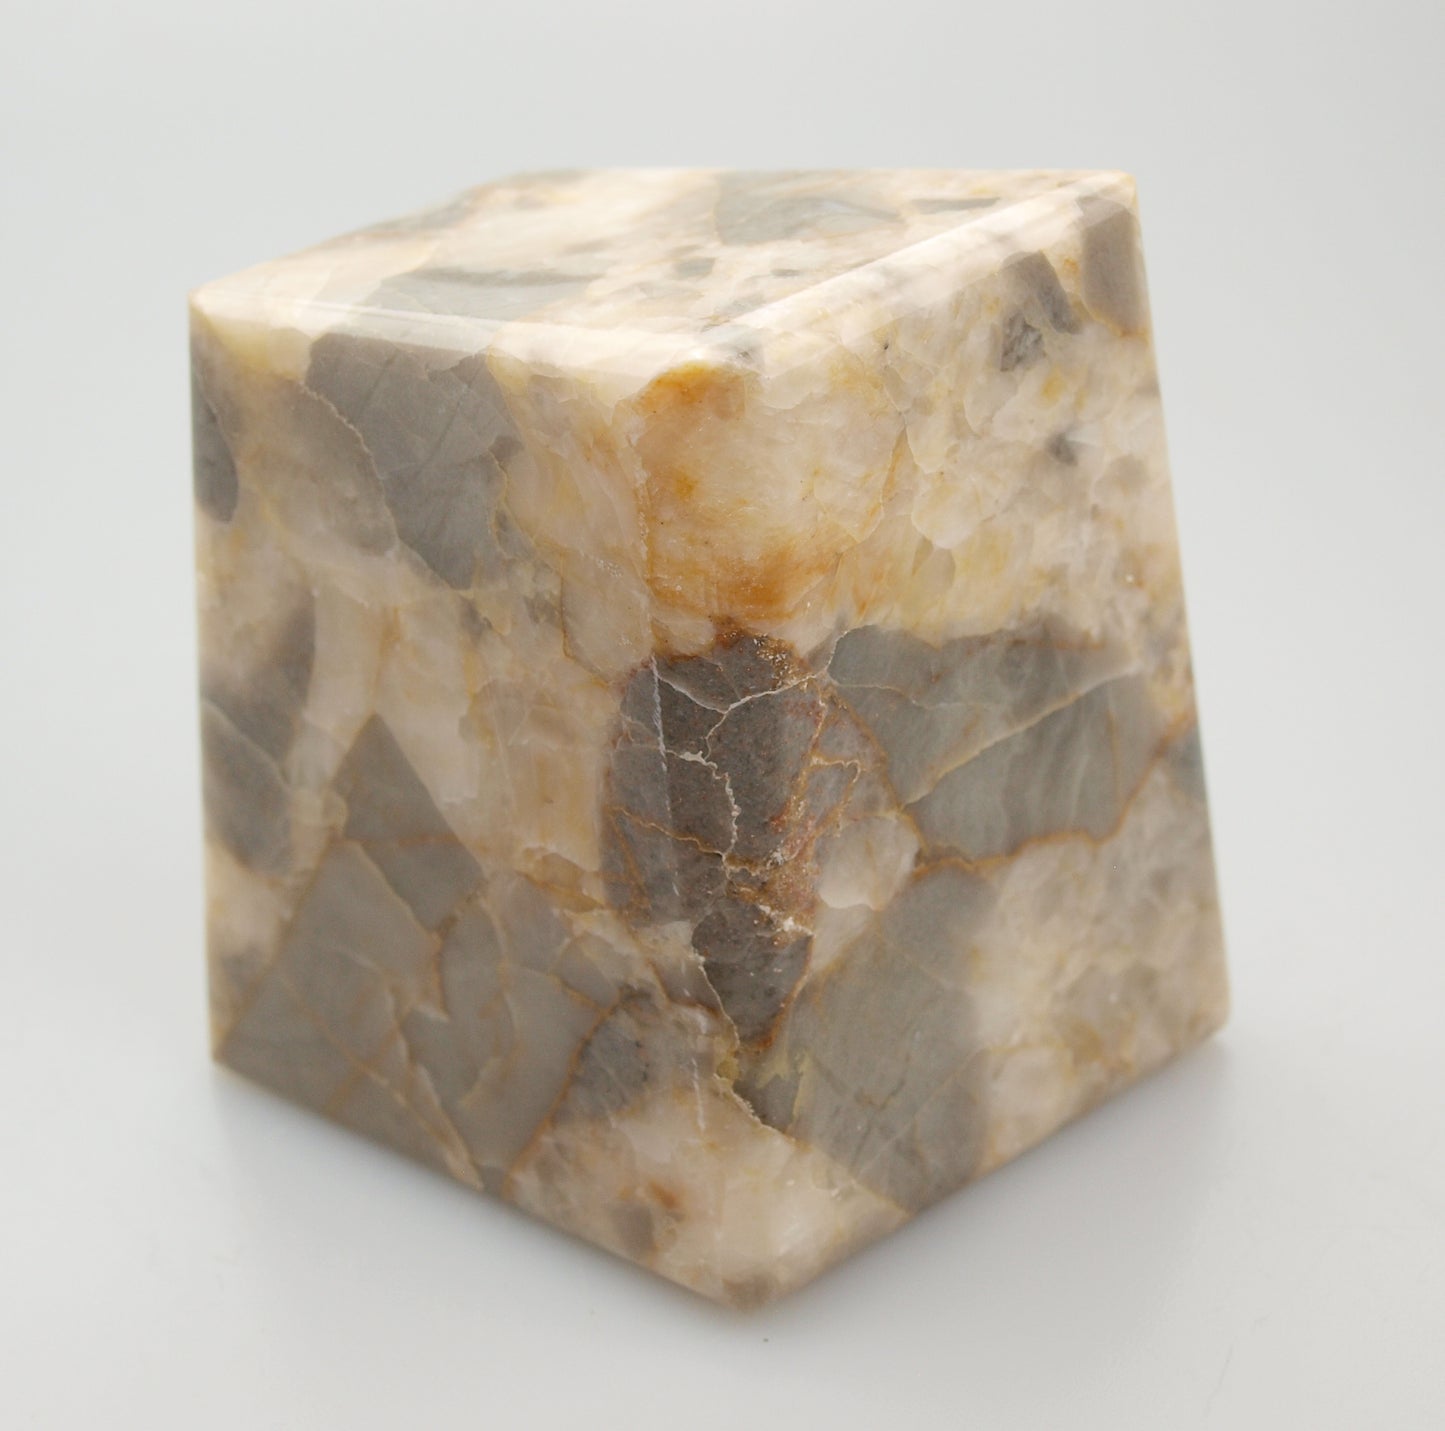 Paperweight of yellow calcite breccia with limestone and coral